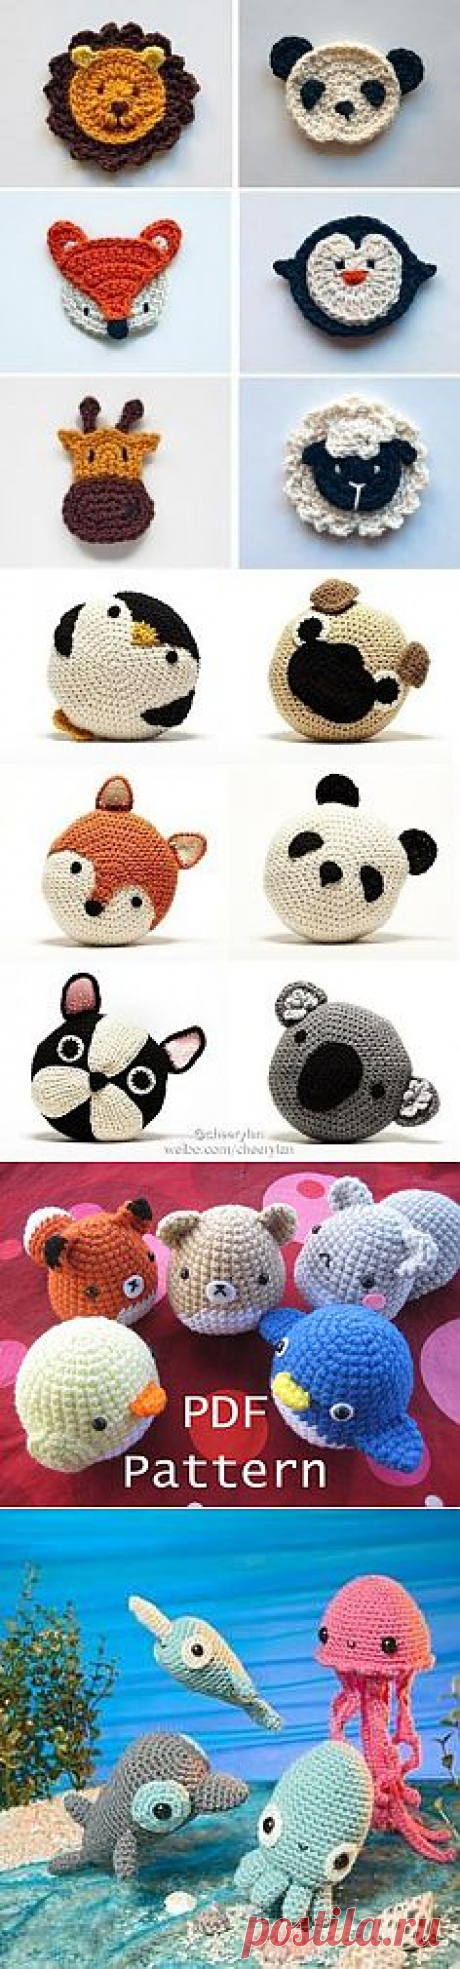 crochet animals can stuff with rice for sensory ... | be creative DIY